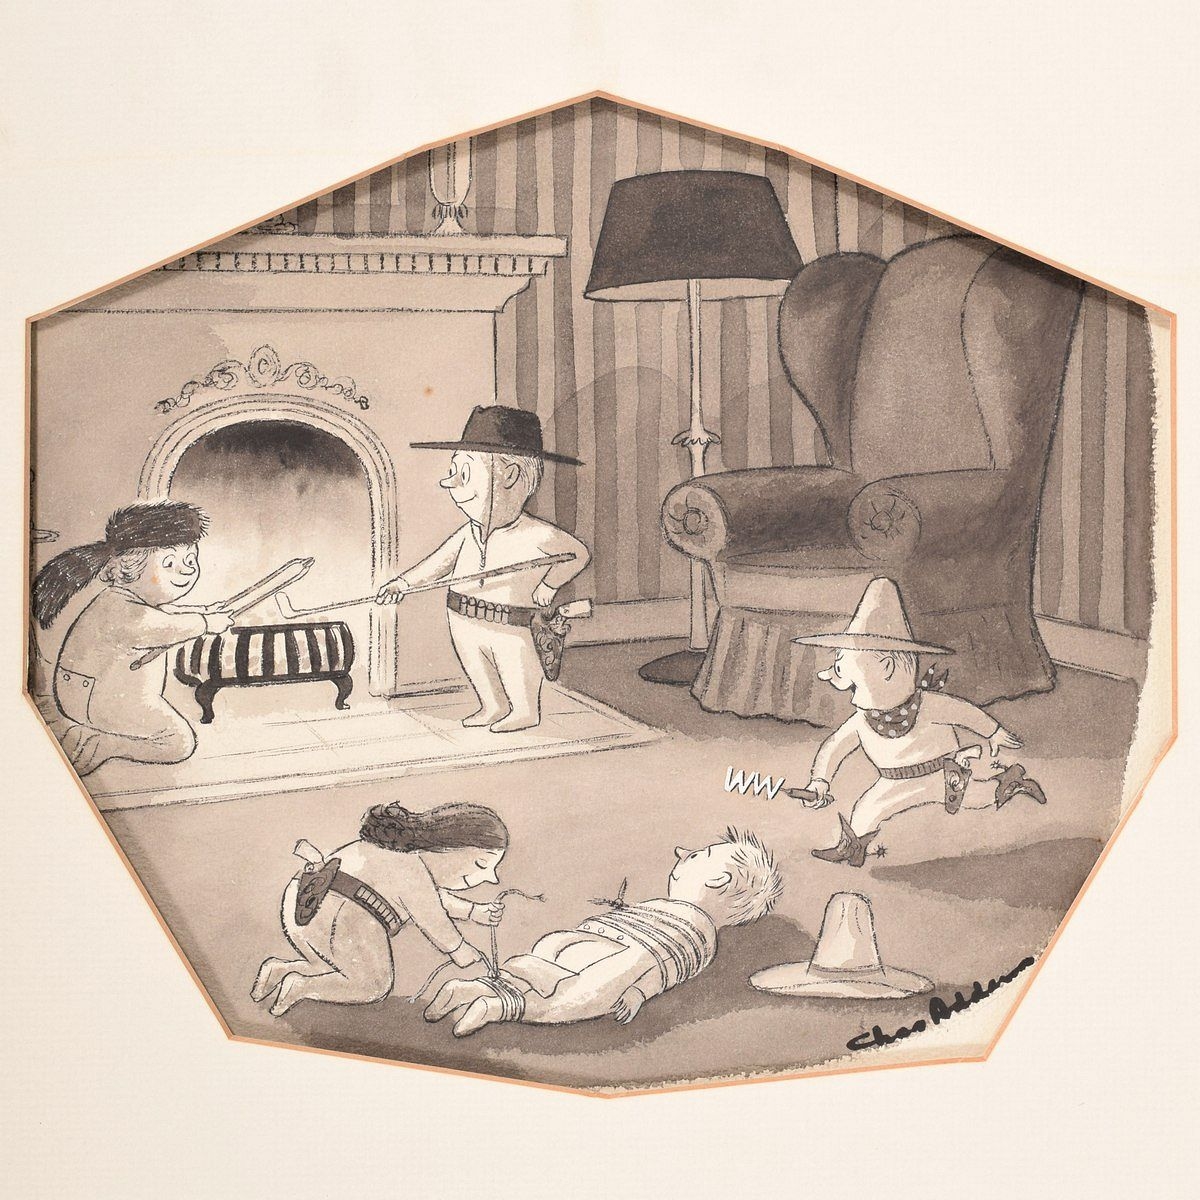 Weather Winky by Charles Addams